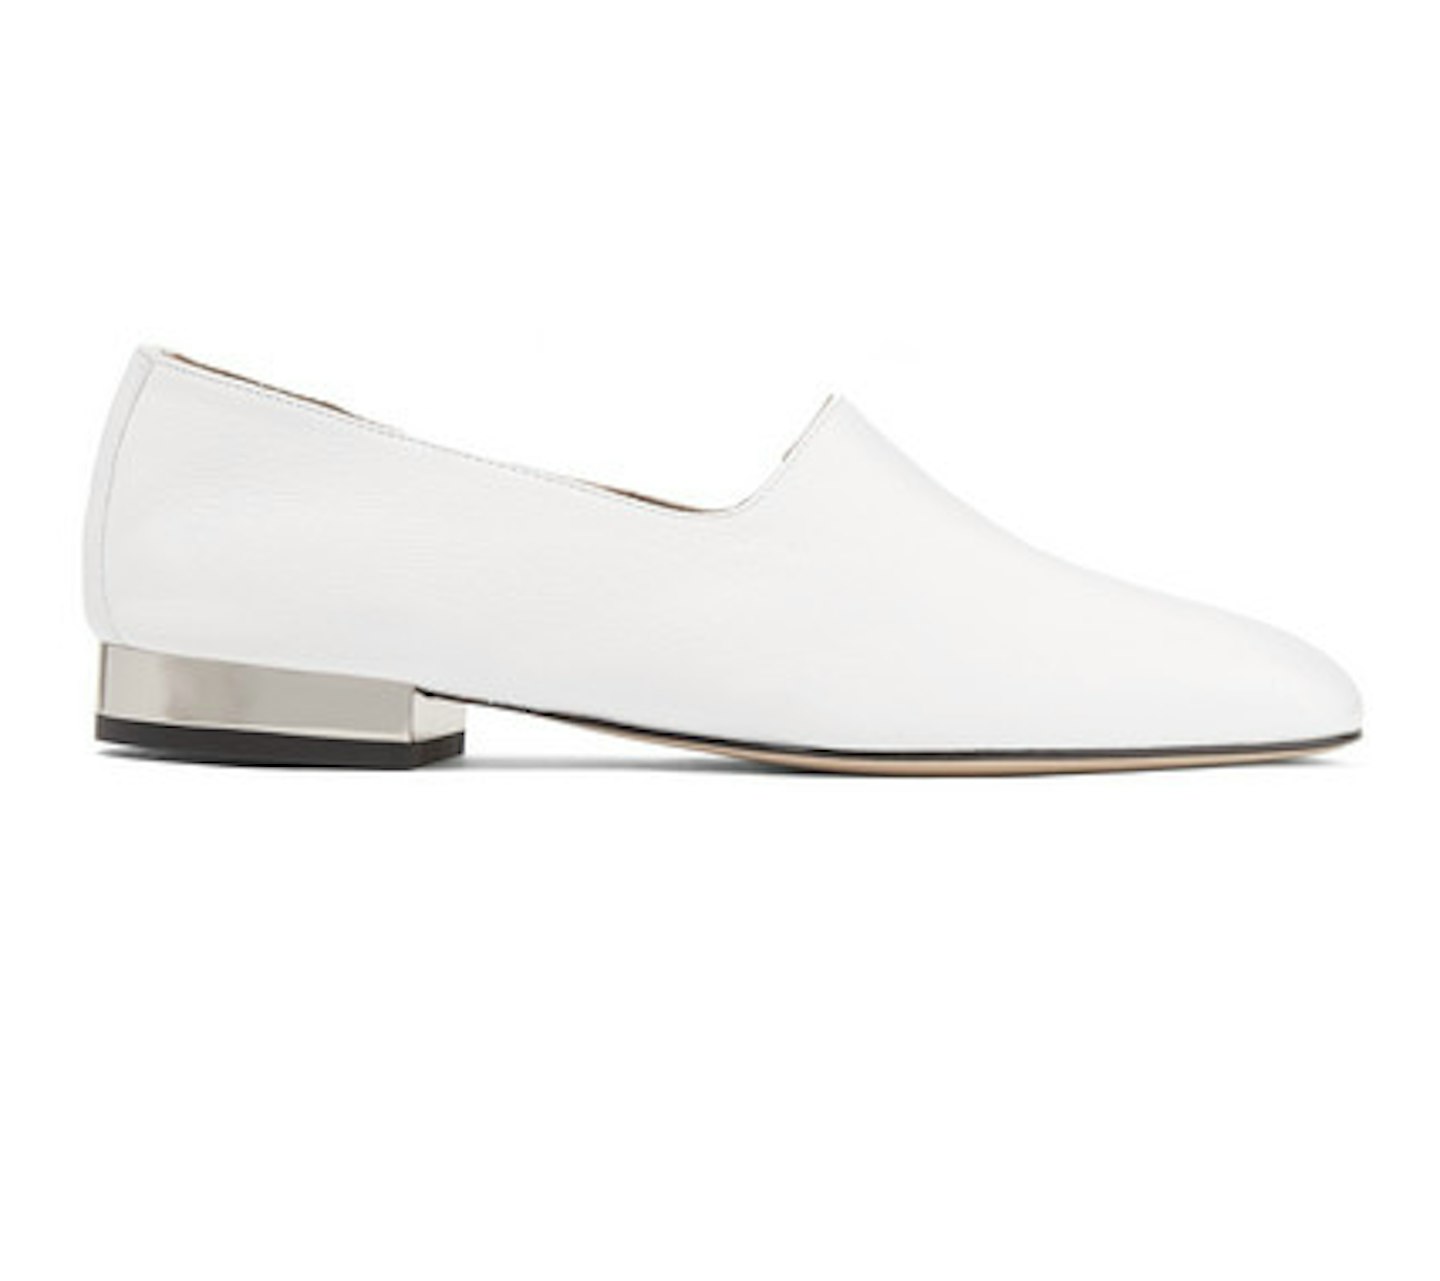 Paul Andrew Ive leather loafers